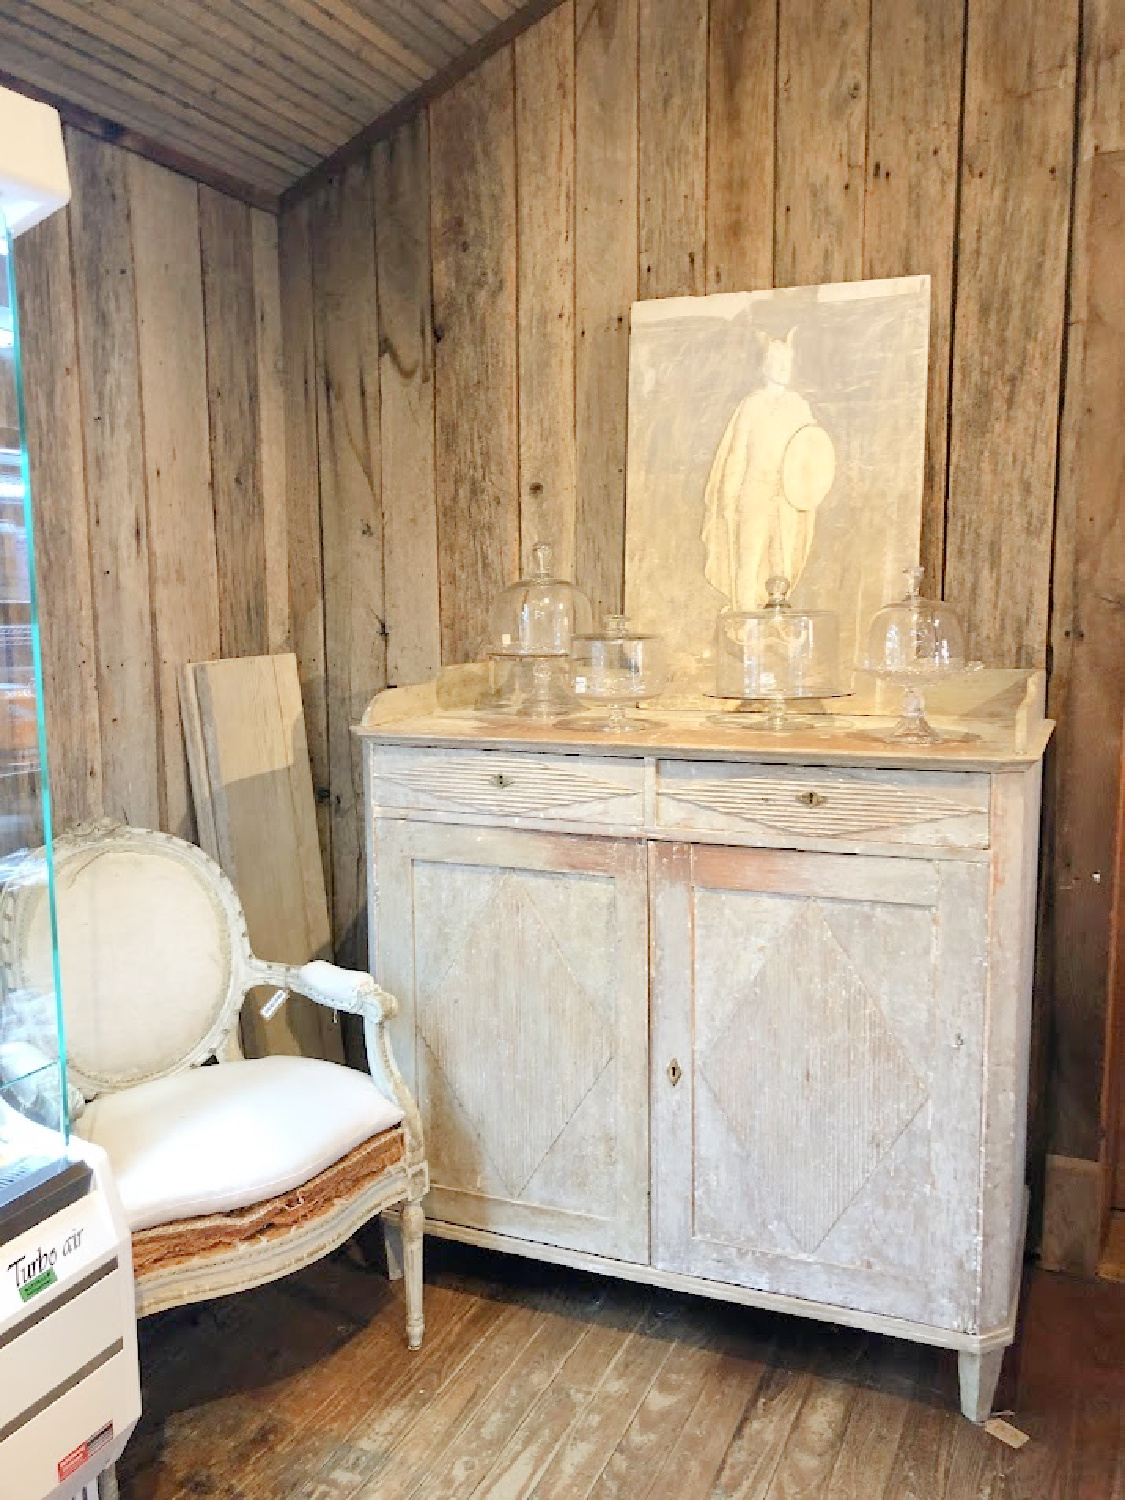 Antique Swedish painted cupboard and French armchair - Patina Home & Garden shop from Giannettis in Leiper's Fork, TN - Hello Lovely Studio. #patinahome #leipersforktn